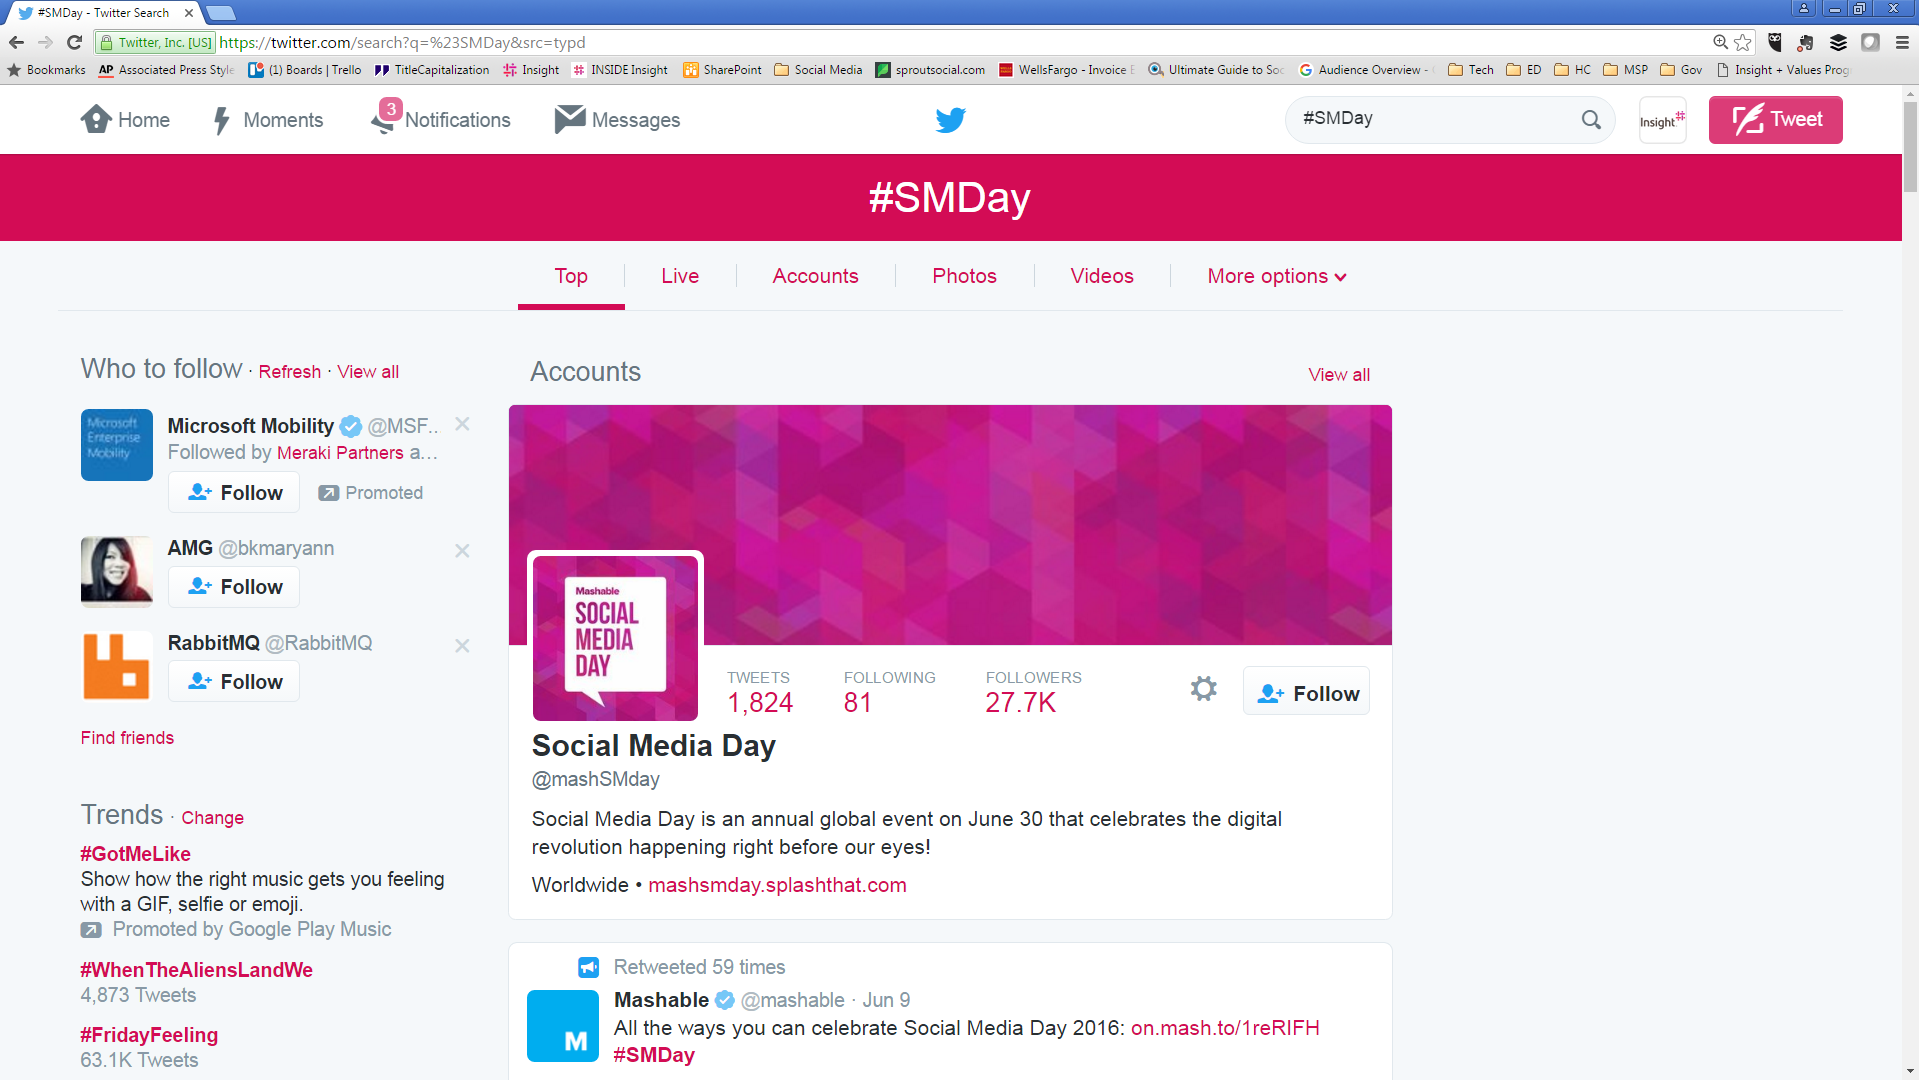 Screenshot of Twitter search results for #SMDay